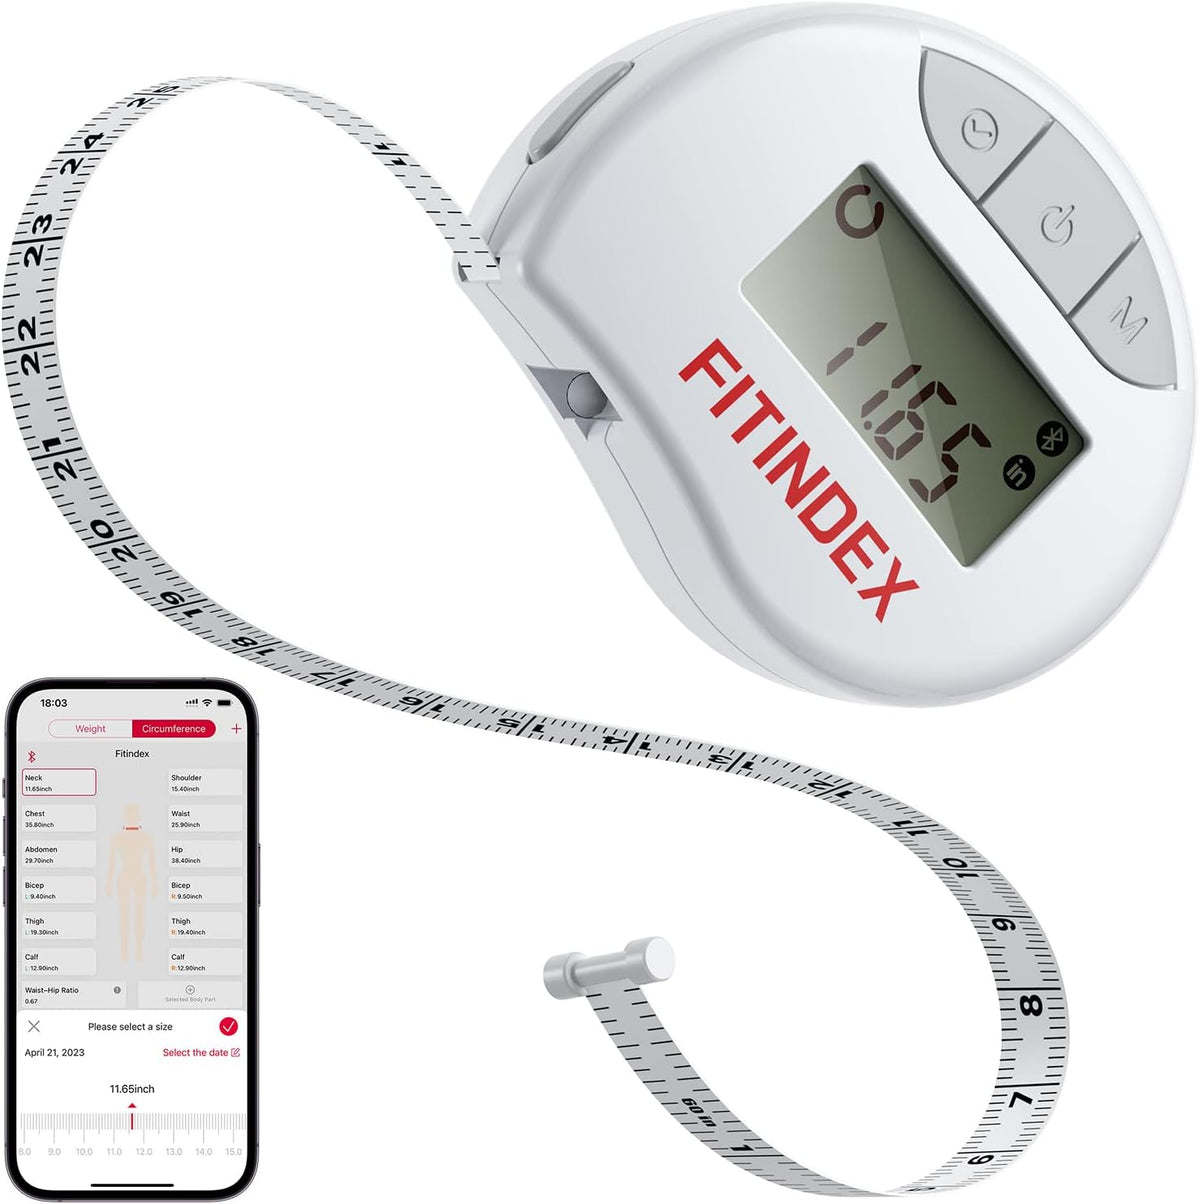 FitIndex Smart Scale, Training Equipment and Health Supplement